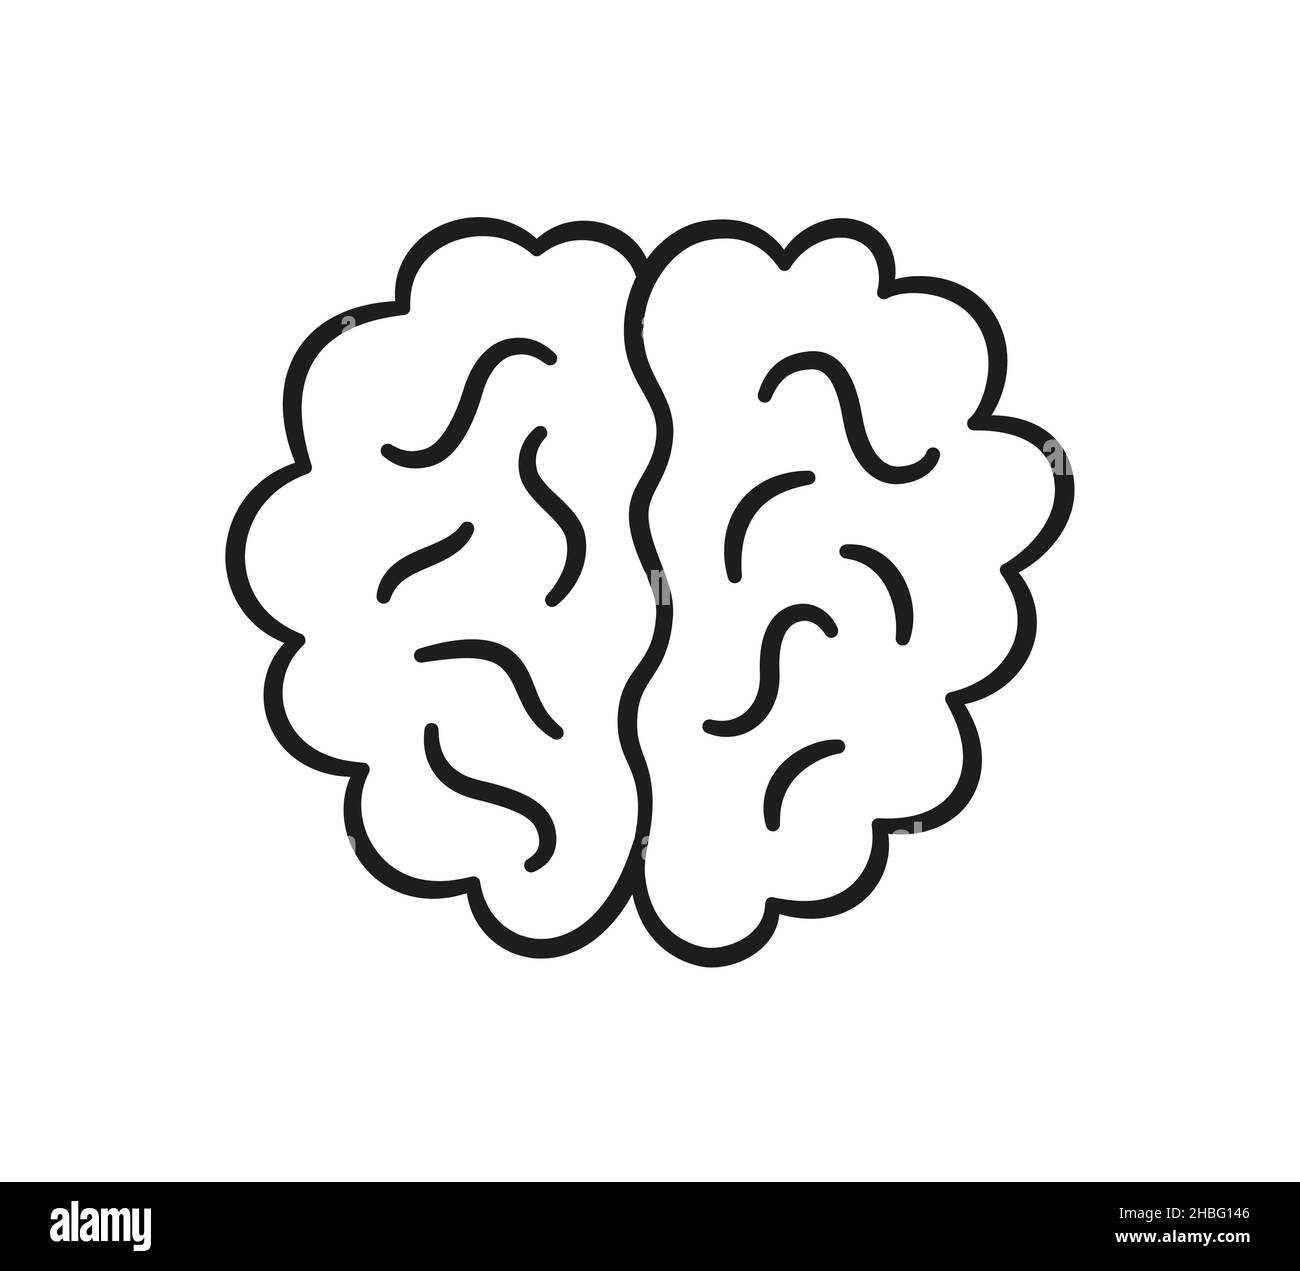 Human brain icon in doodle style. Mind symbol. Children drawing. Hand drawn vector illustration isolated on white background Stock Vector